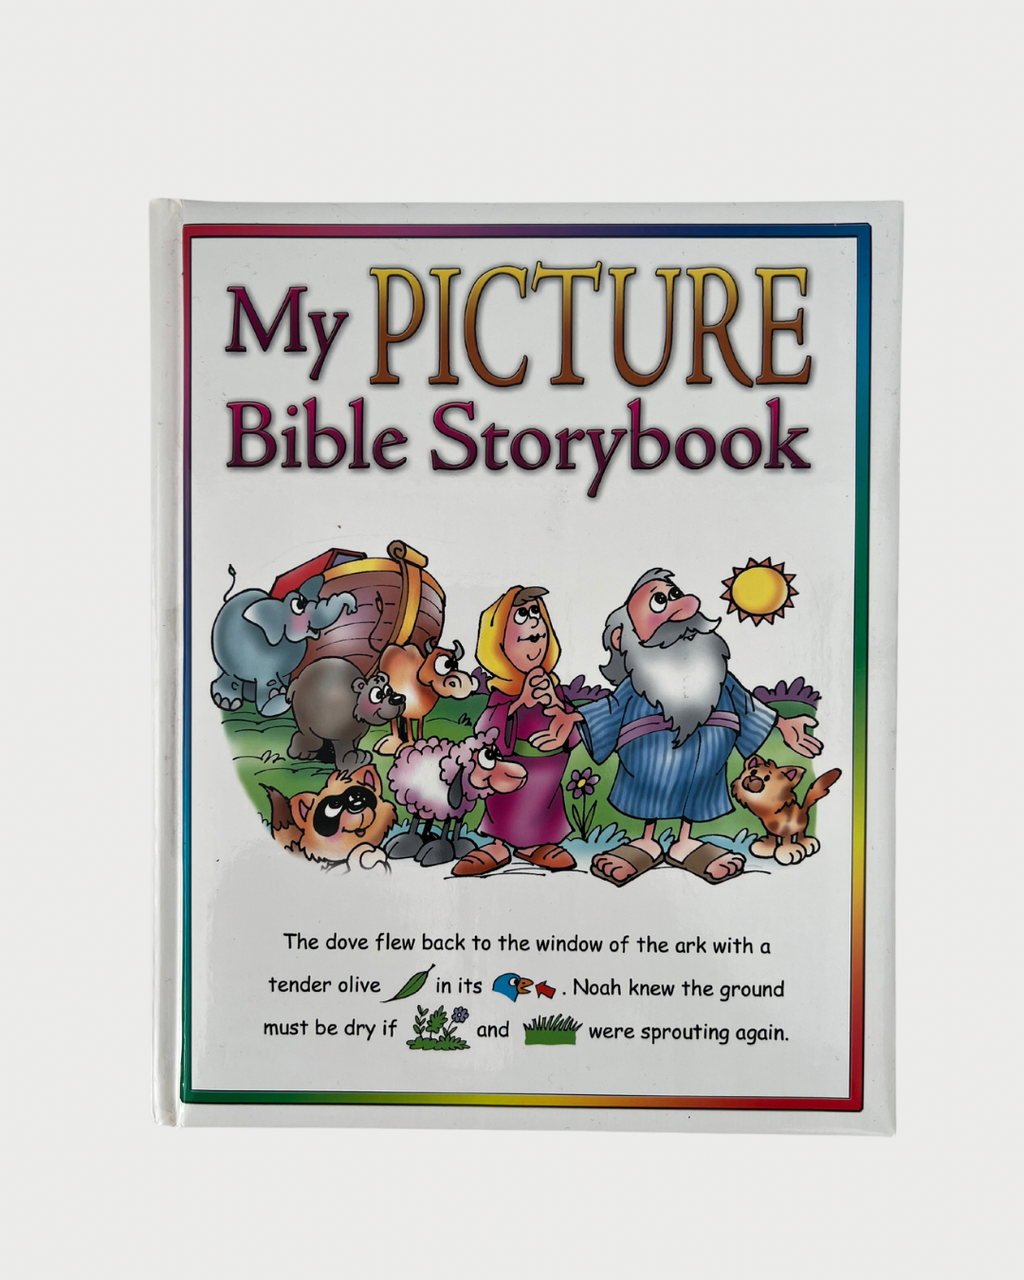 My Picture Bible Storybook